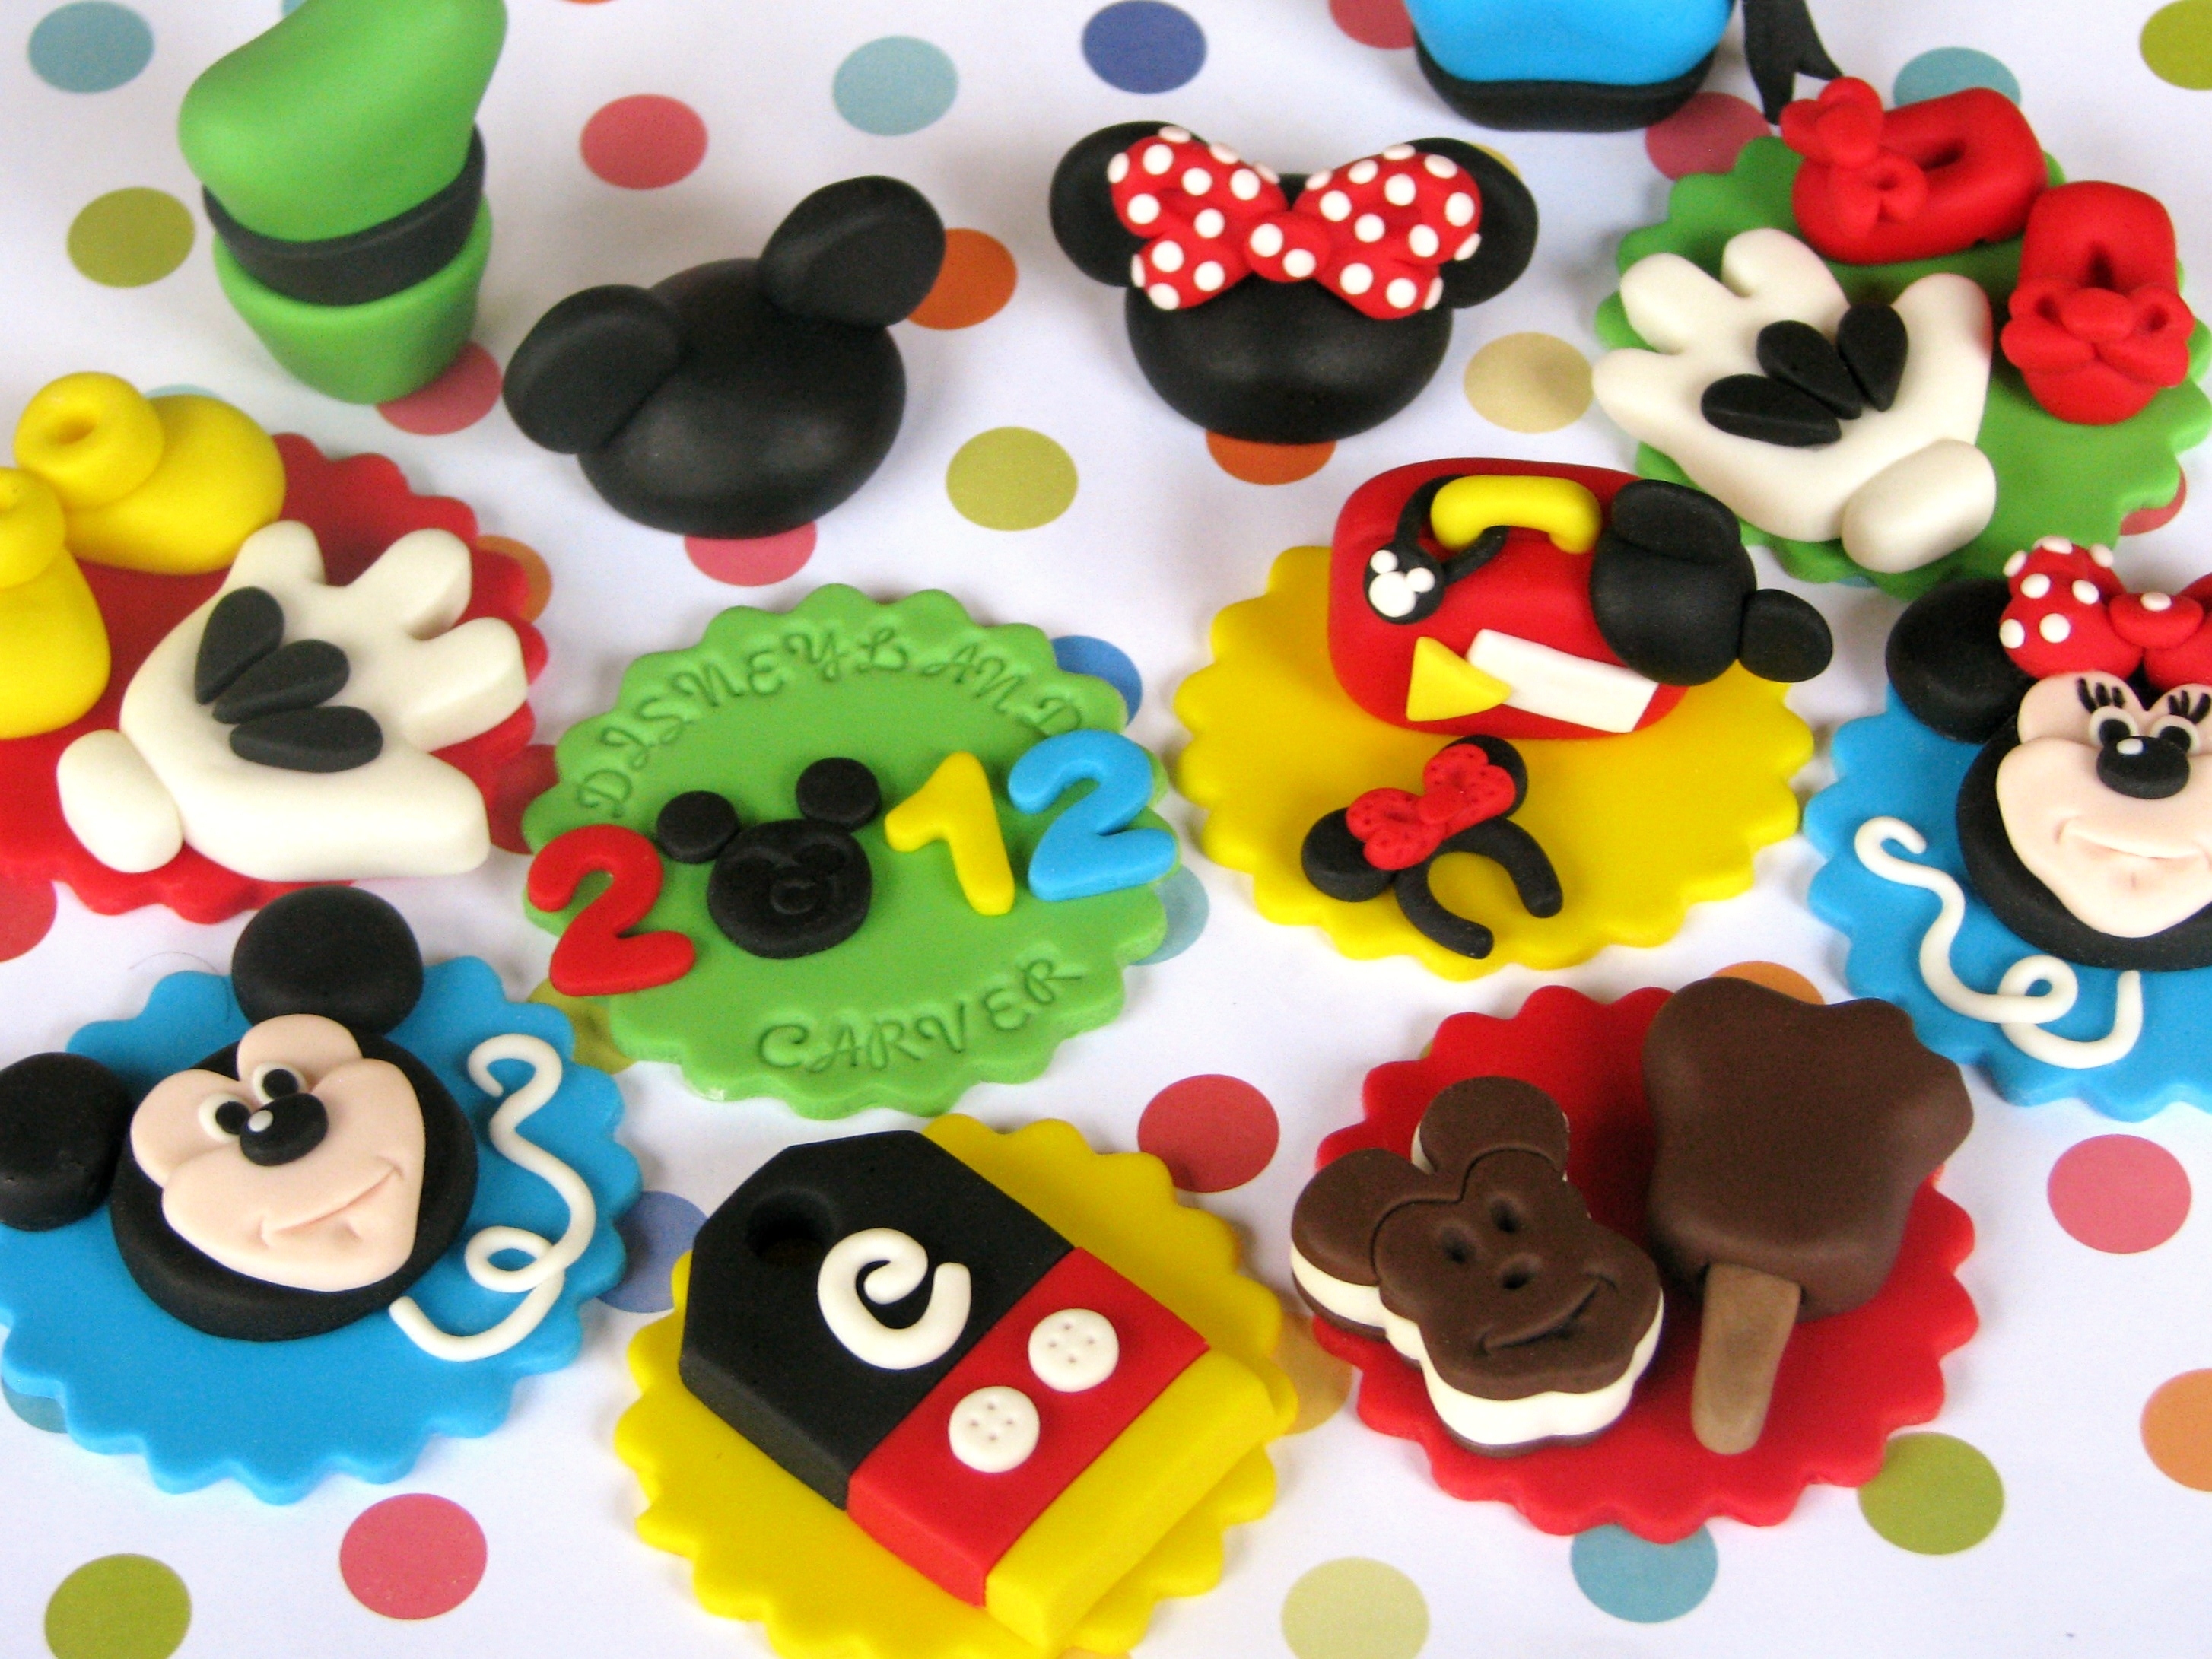 Disney Cupcake Toppers